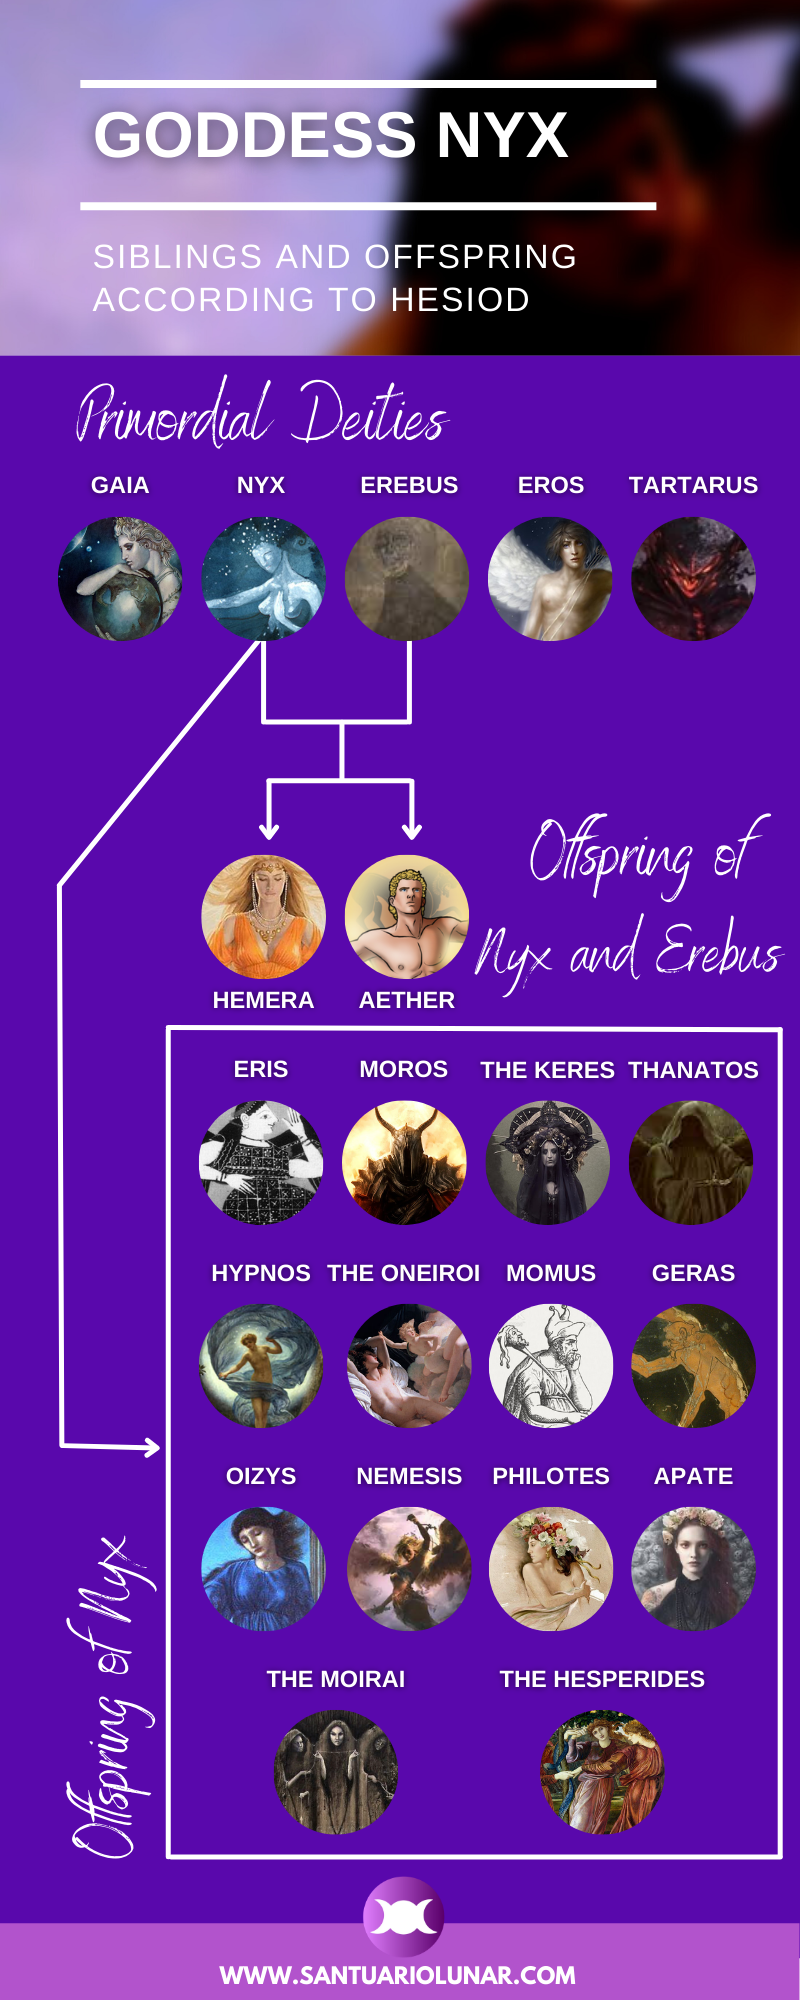 Goddess Nyx Siblings and Offspring - Genealogy according to Hesiod Infographic